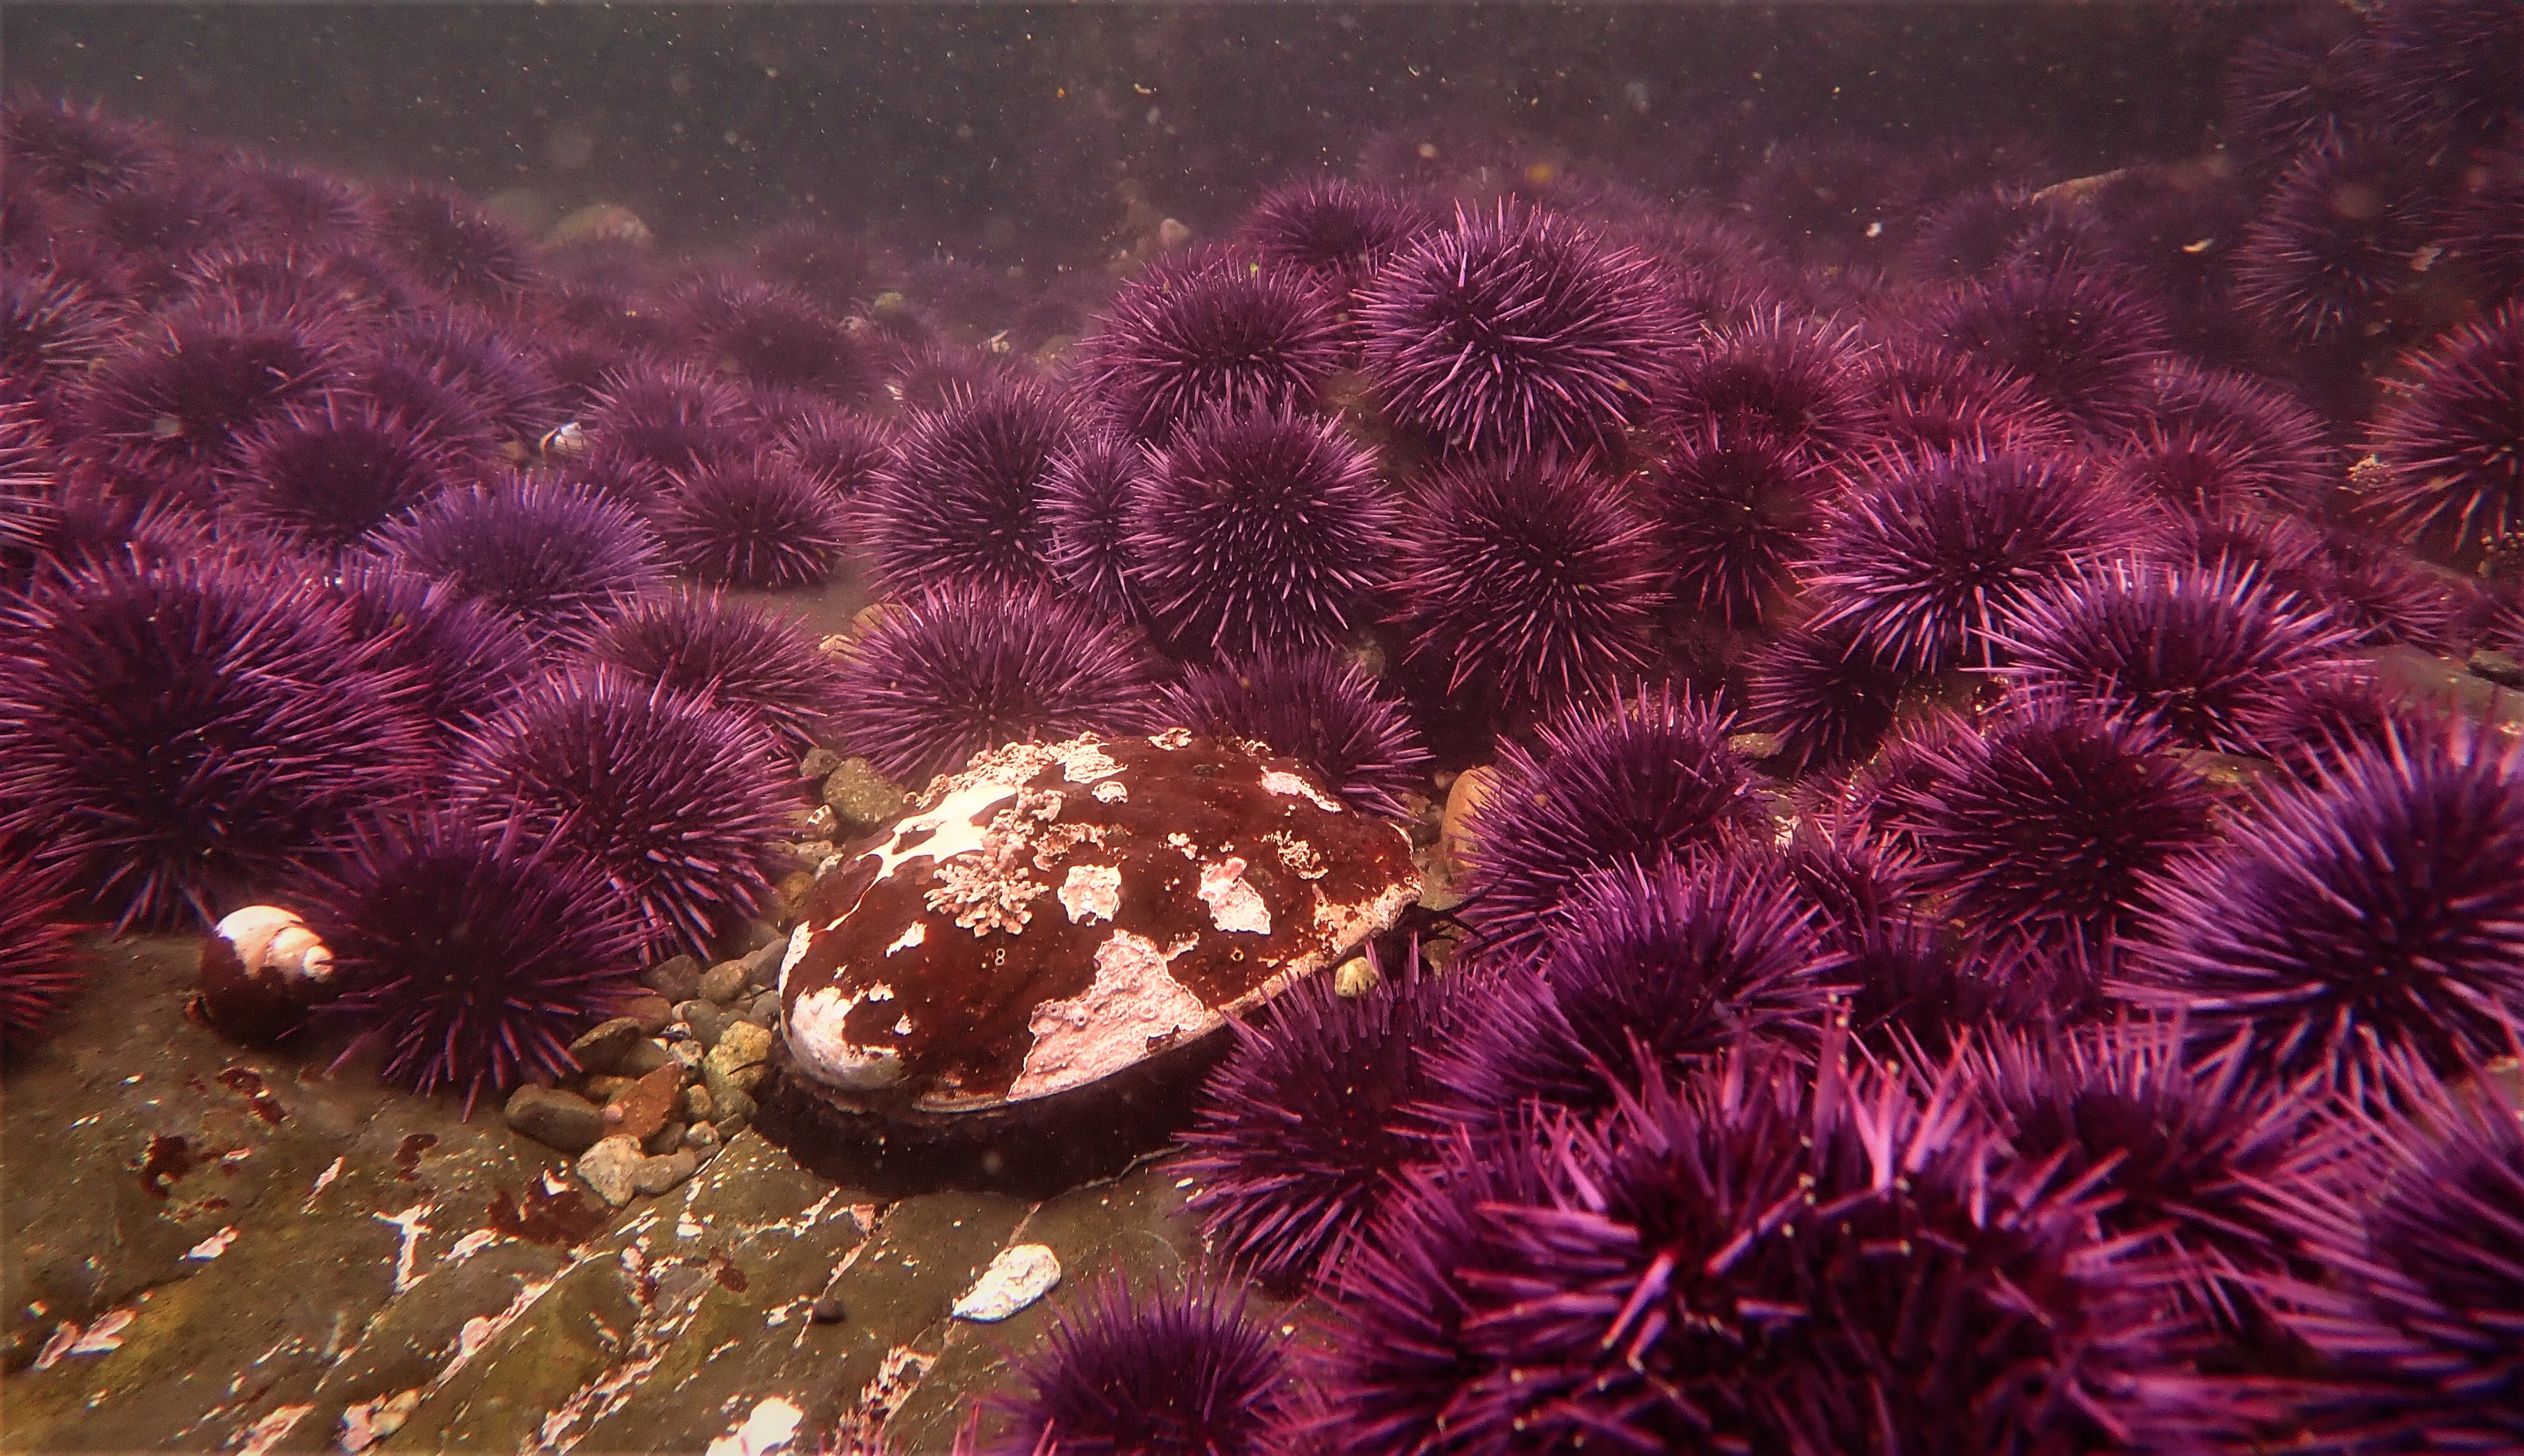 Red abalone surrounded by a barren of purple sea urchins.